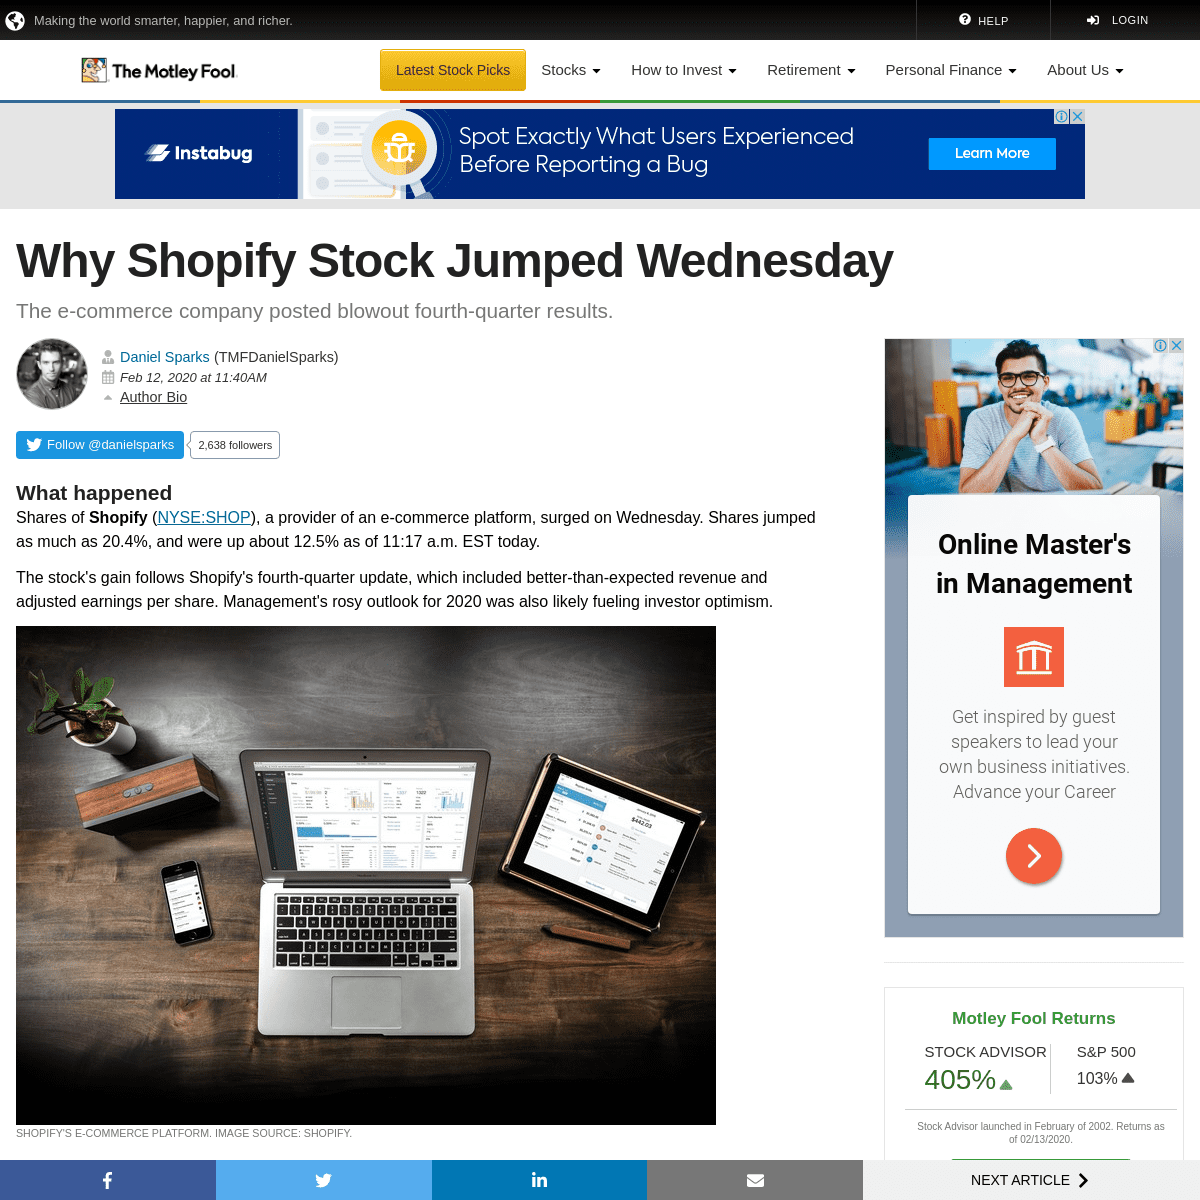 A complete backup of www.fool.com/investing/2020/02/12/why-shopify-stock-jumped-wednesday.aspx